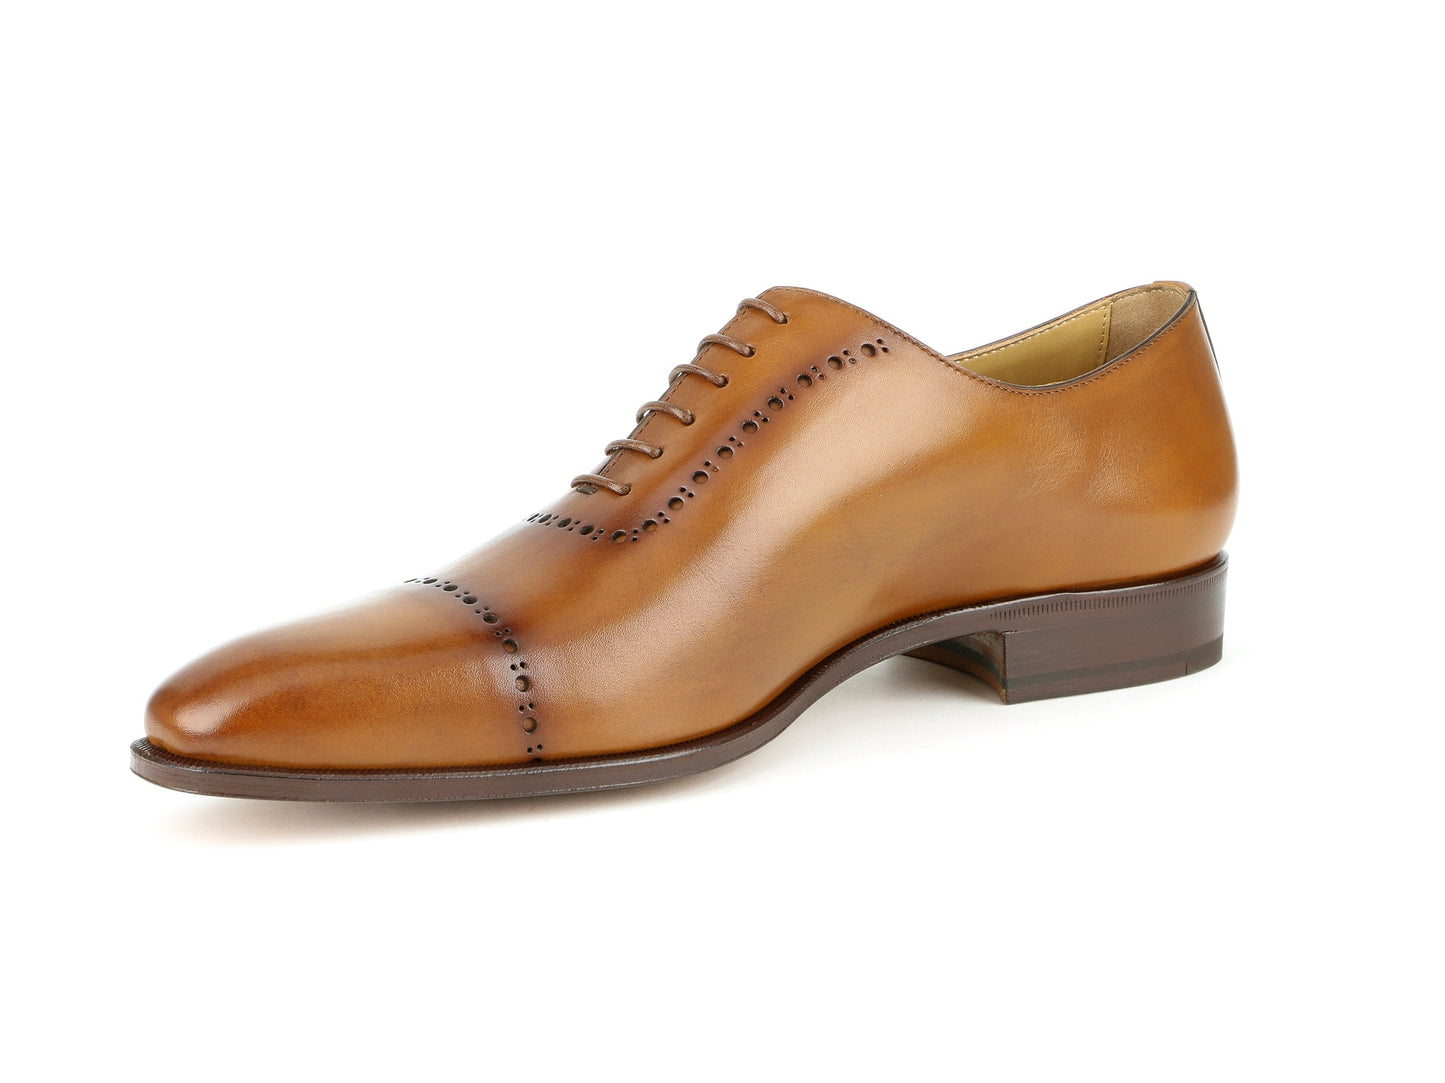 GIORGIO - Rustic Bombay Leather Oxford punch holed